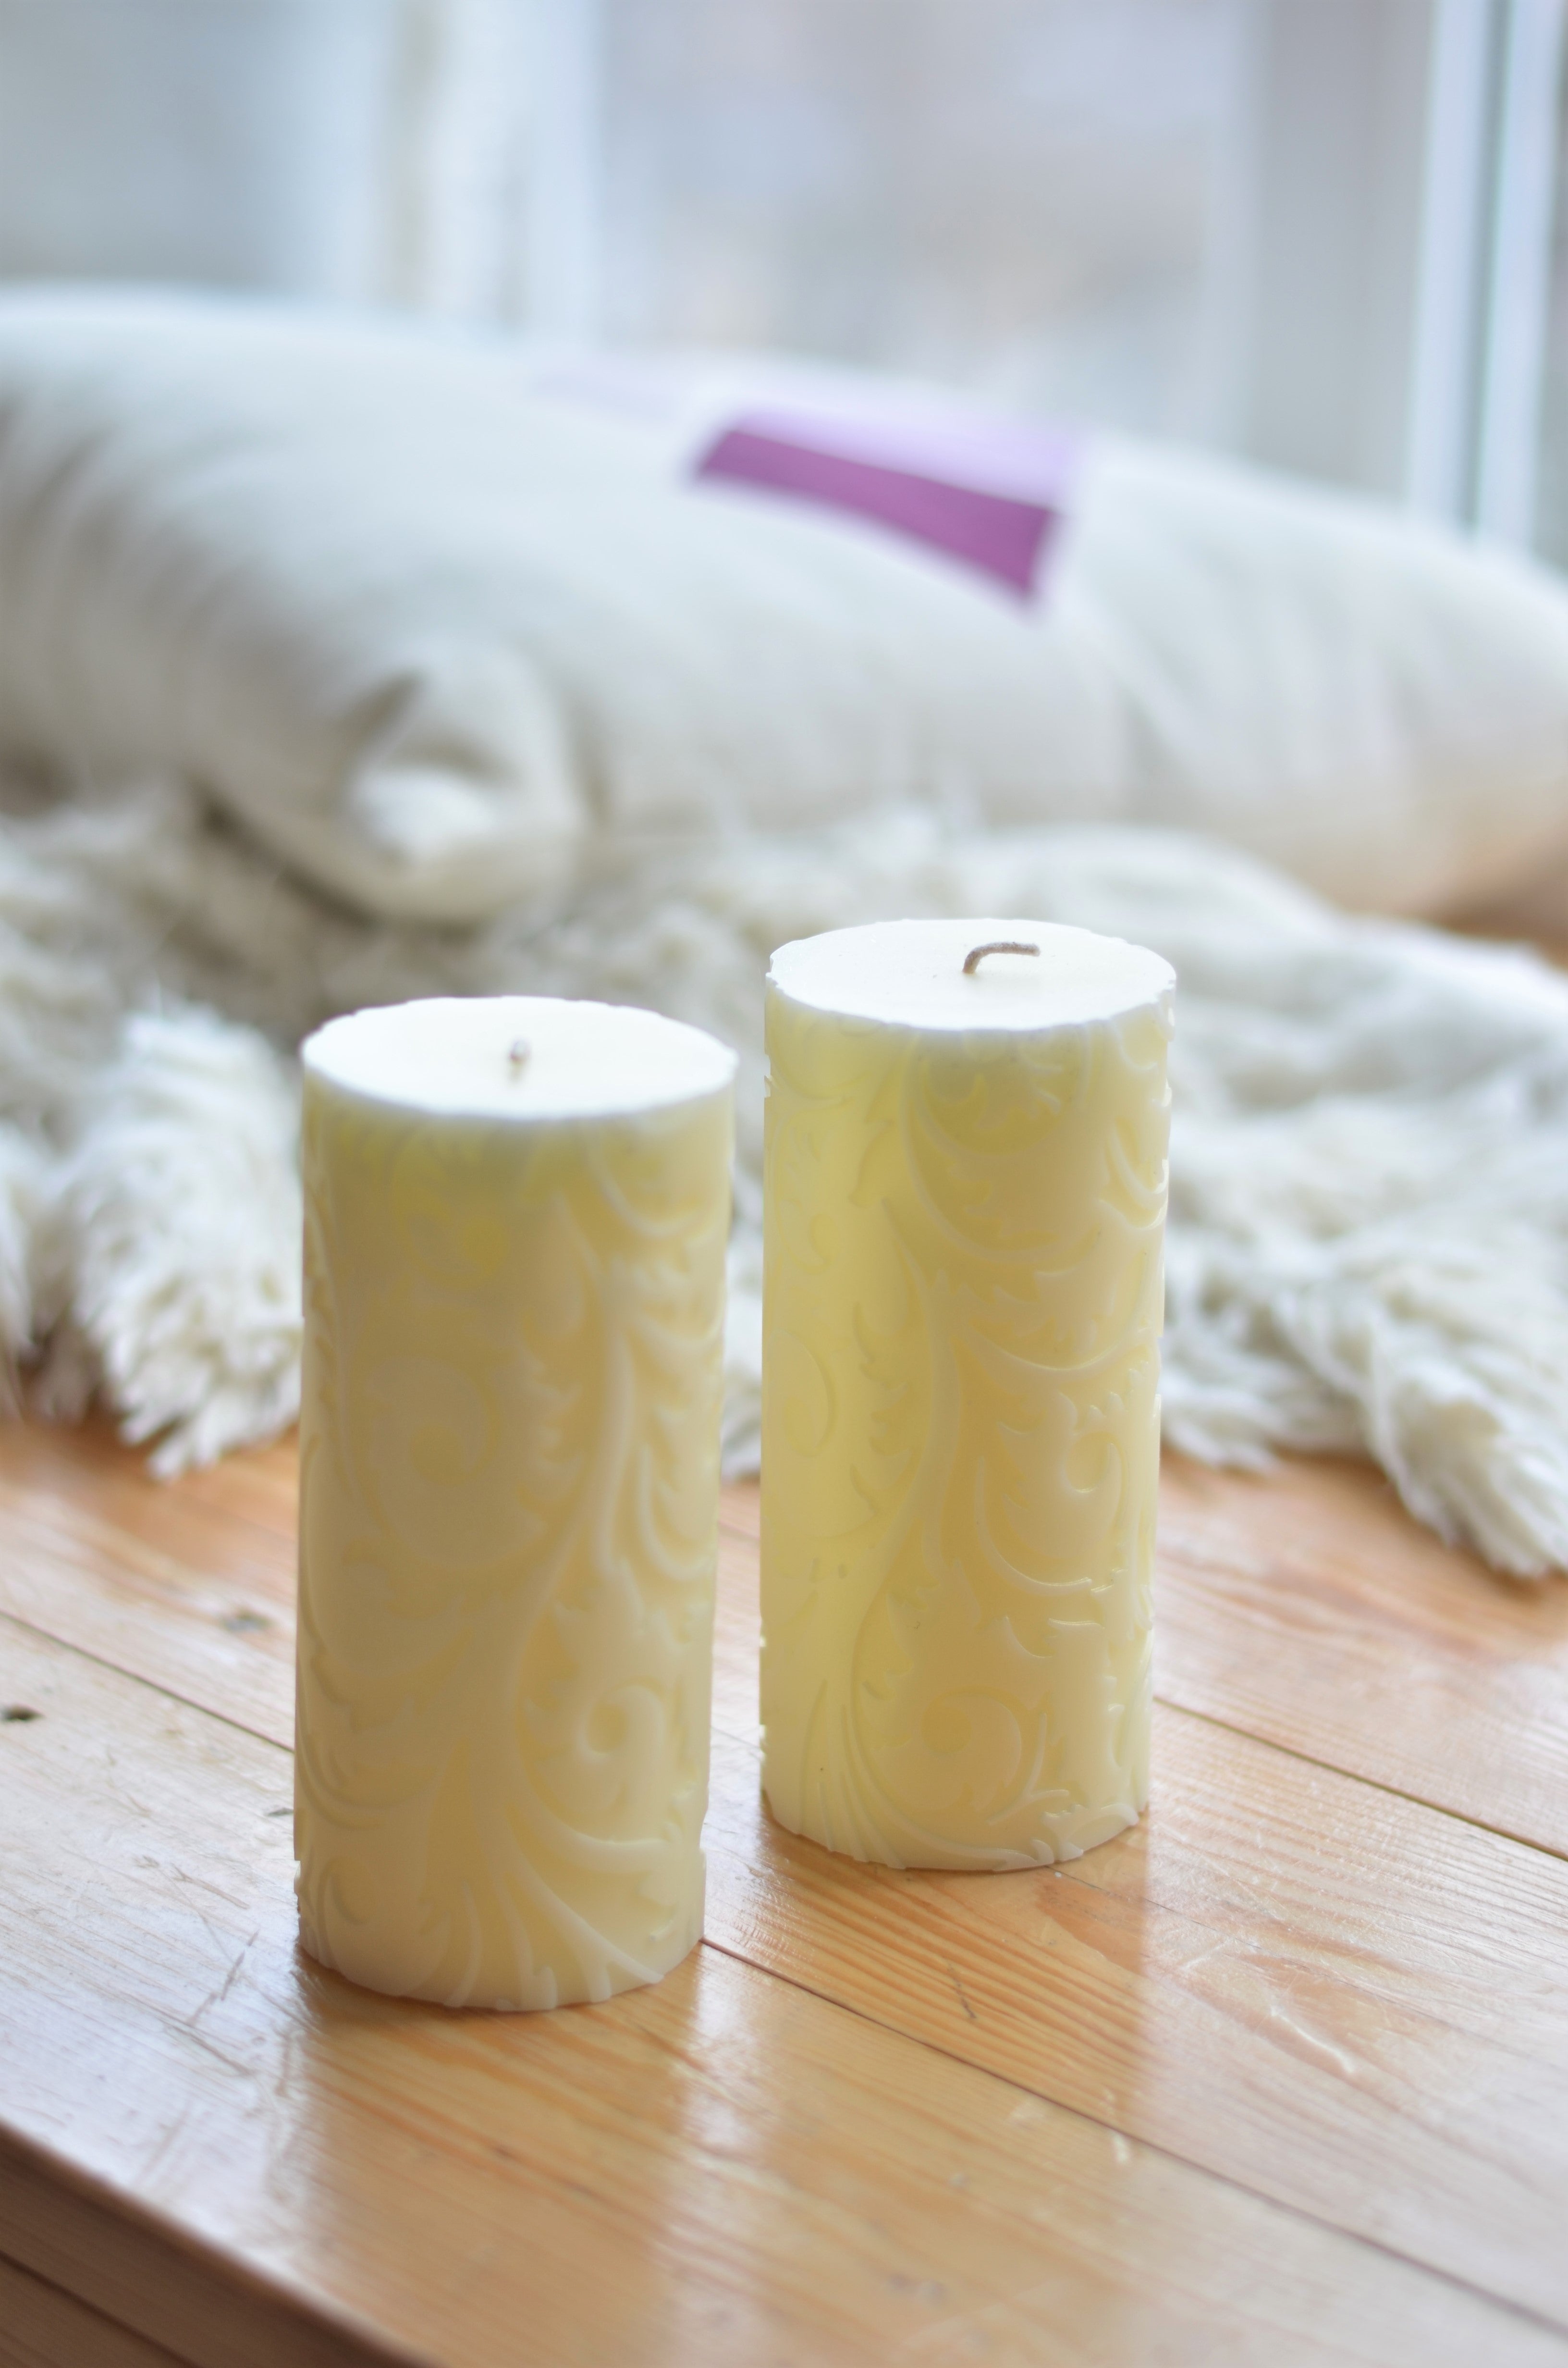 Magik Life 2 Pack Pillar Candles 3x6 Unscented Decorative Long Lasting Handcrafted Candles- Pillar Candle 60 Hour Burn